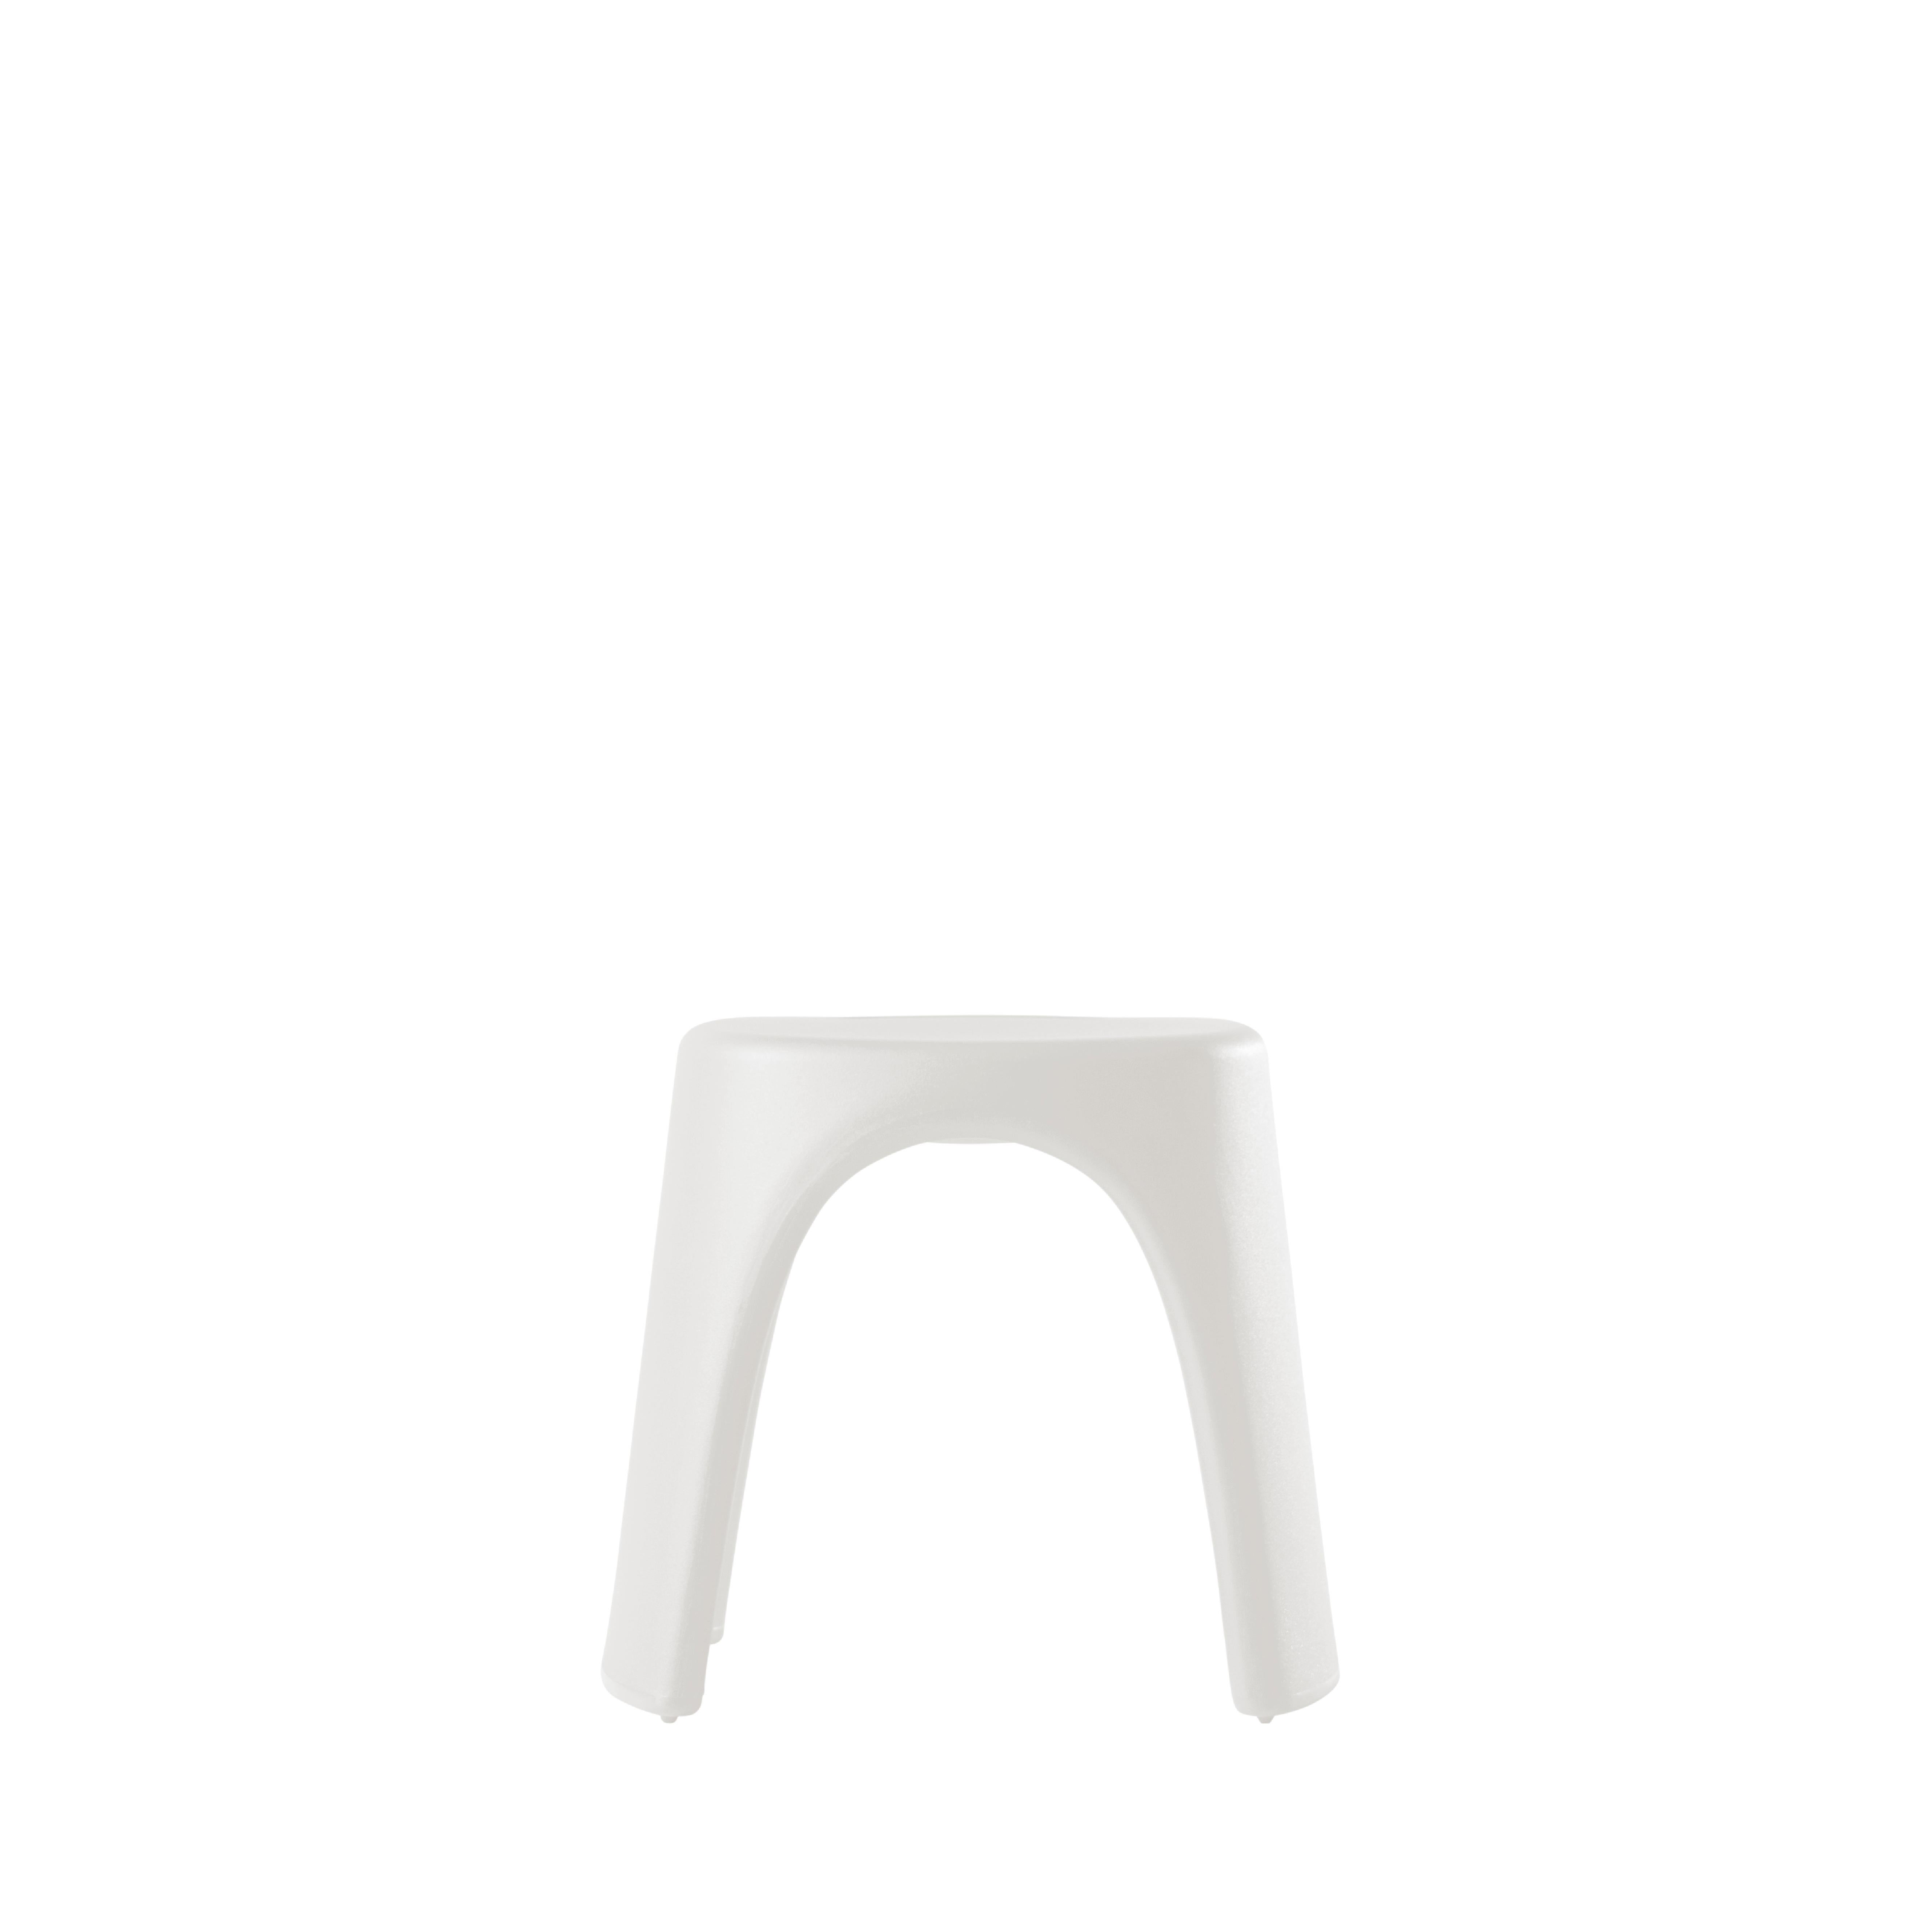 Dove Grey Amélie Sgabello Stool by Italo Pertichini
Dimensions: D 40 x W 46 x H 43 cm.
Materials: Polyethylene.
Weight: 4 kg.

Available in a standard version and lacquered version. Prices may vary. Available in different color options. This product